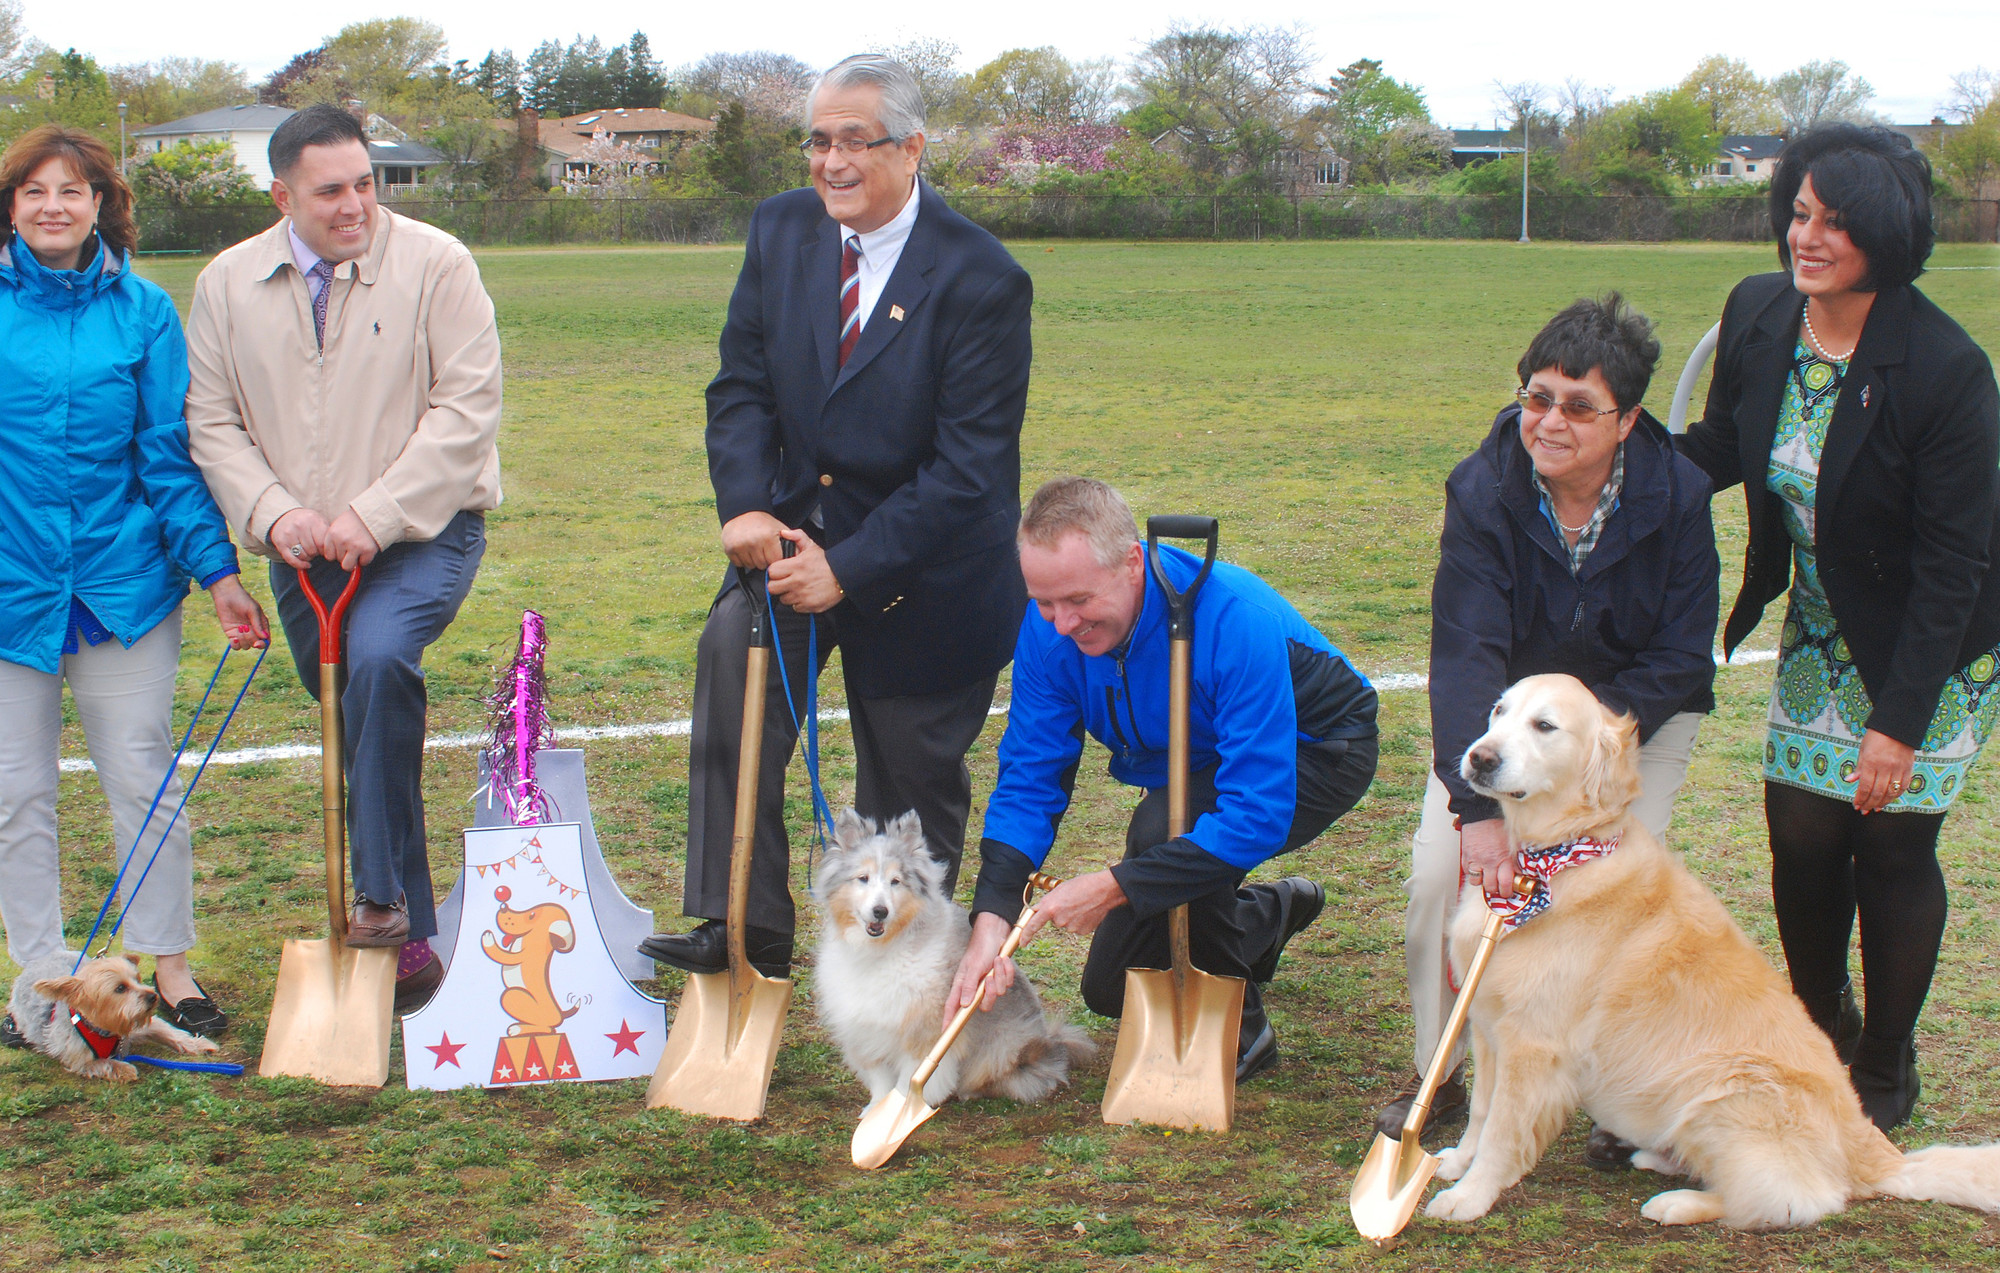 Oliver, from left, Sparkles and Cooper, the dogs, helped break ground on May 5 on a new 14,024-square-foot dog park at Newbridge Road Park in Bellmore, with assistance from Town of Hempstead officials and employees.